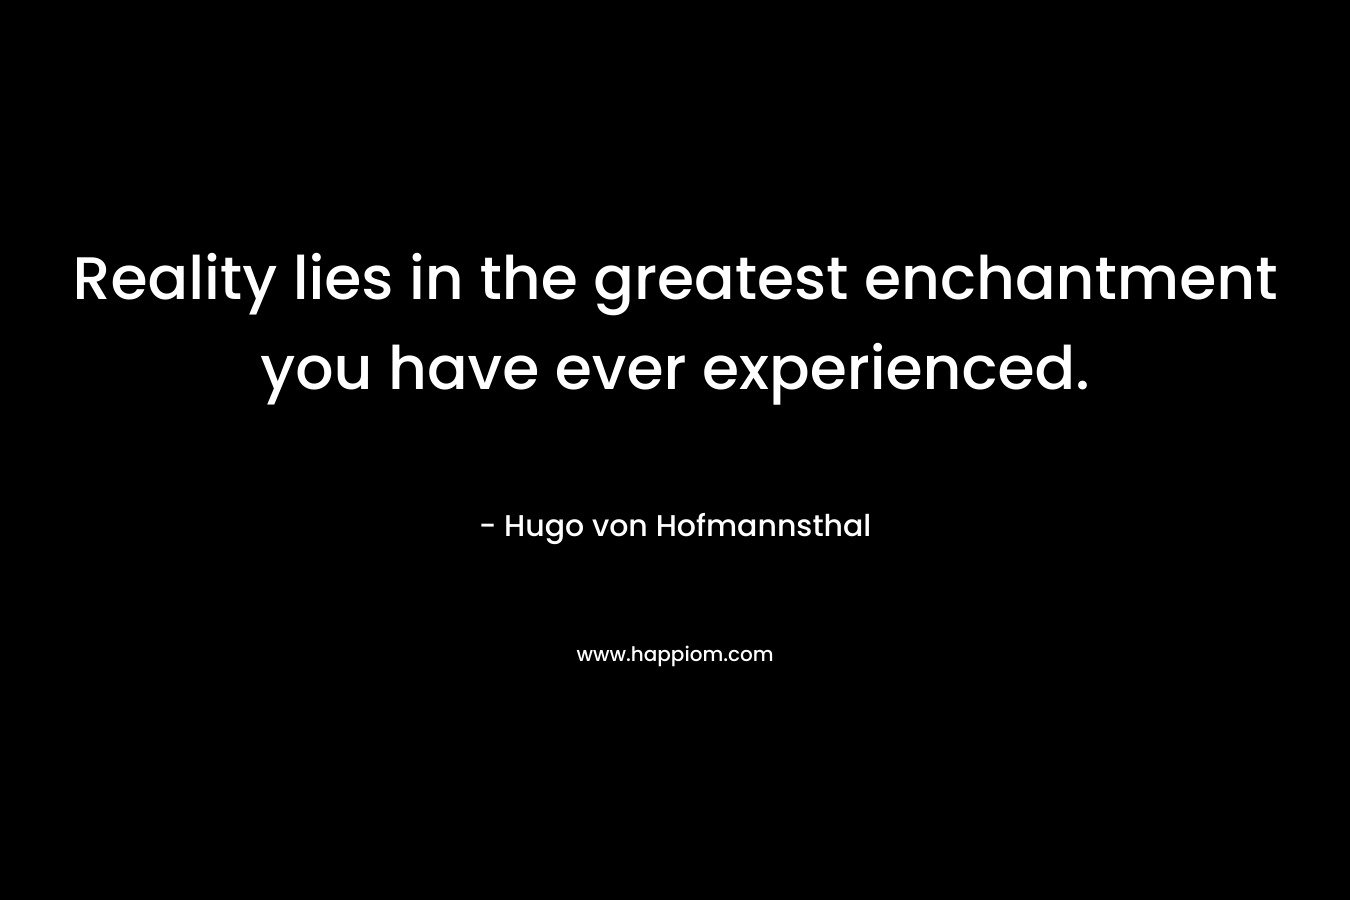 Reality lies in the greatest enchantment you have ever experienced. – Hugo von Hofmannsthal